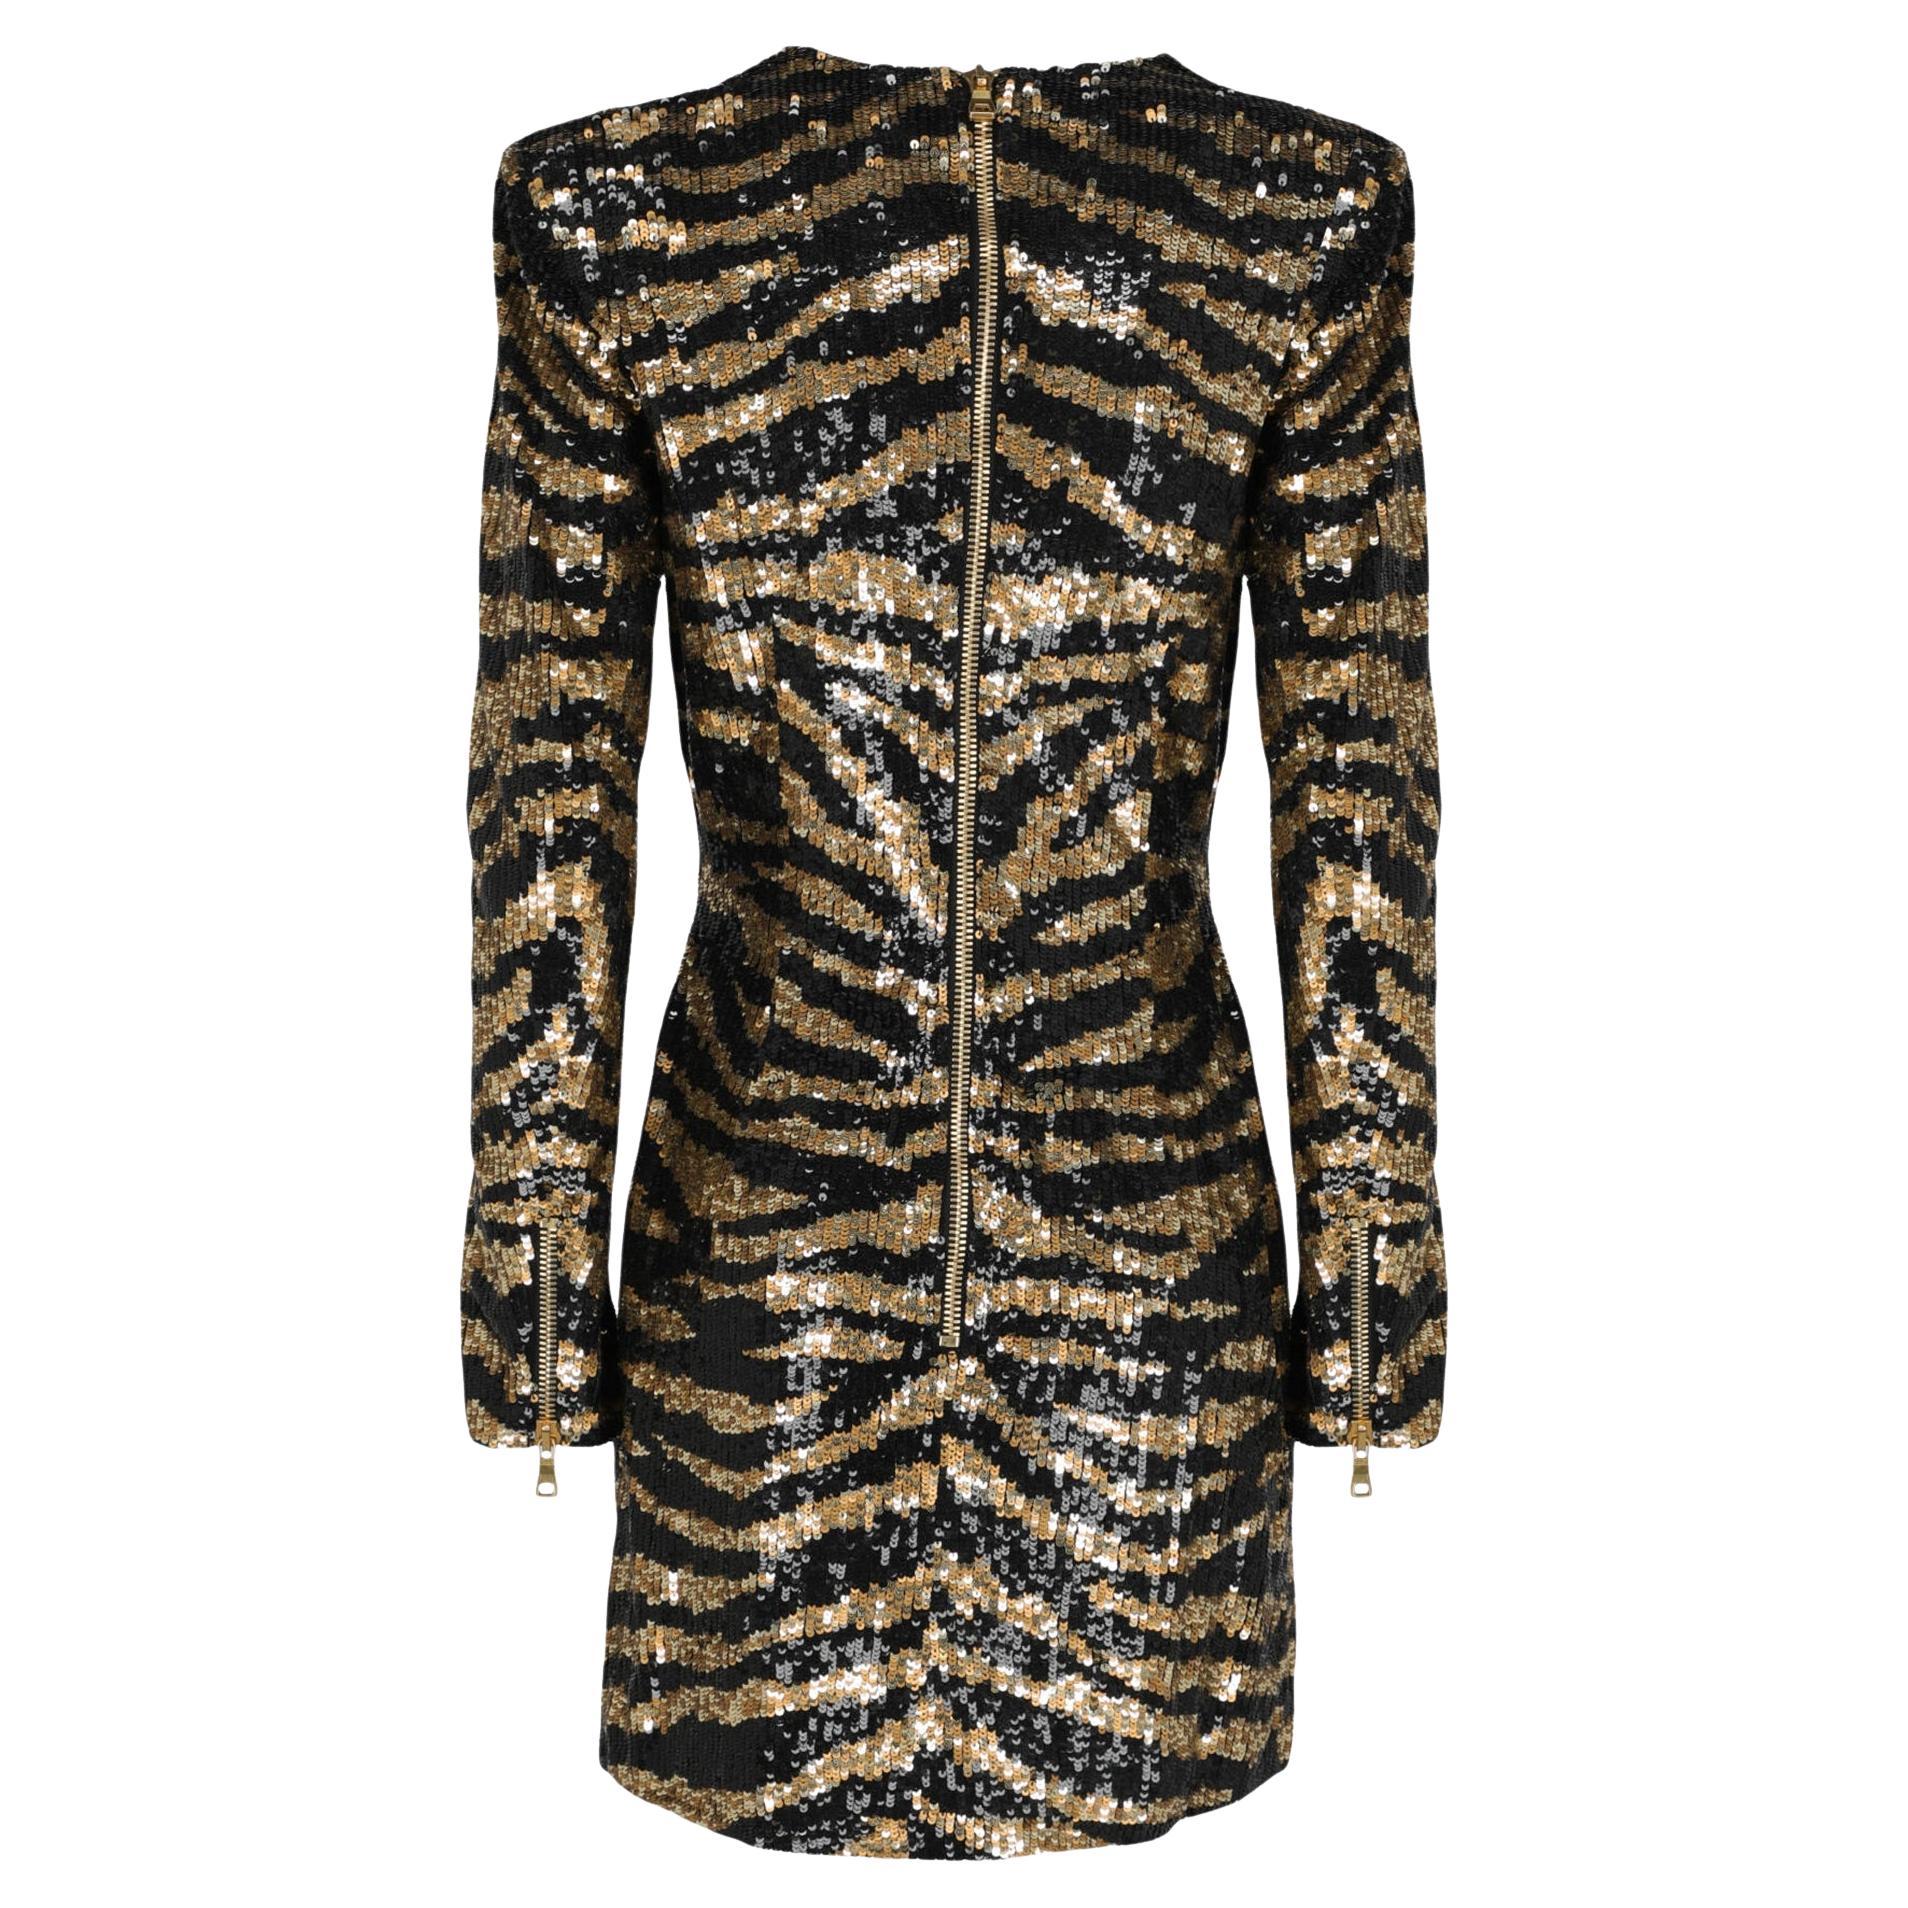 Balmain 
Sequined Tiger-Stripe Mini Dress, Black/Gold from celebrity closet!

Plunging V neckline
Long sleeves
Nips at natural waist
Straight mini skirt and hem
Exposed back zip


FR Size 36 - US S
Made in France


Brand new,  with tags!


os